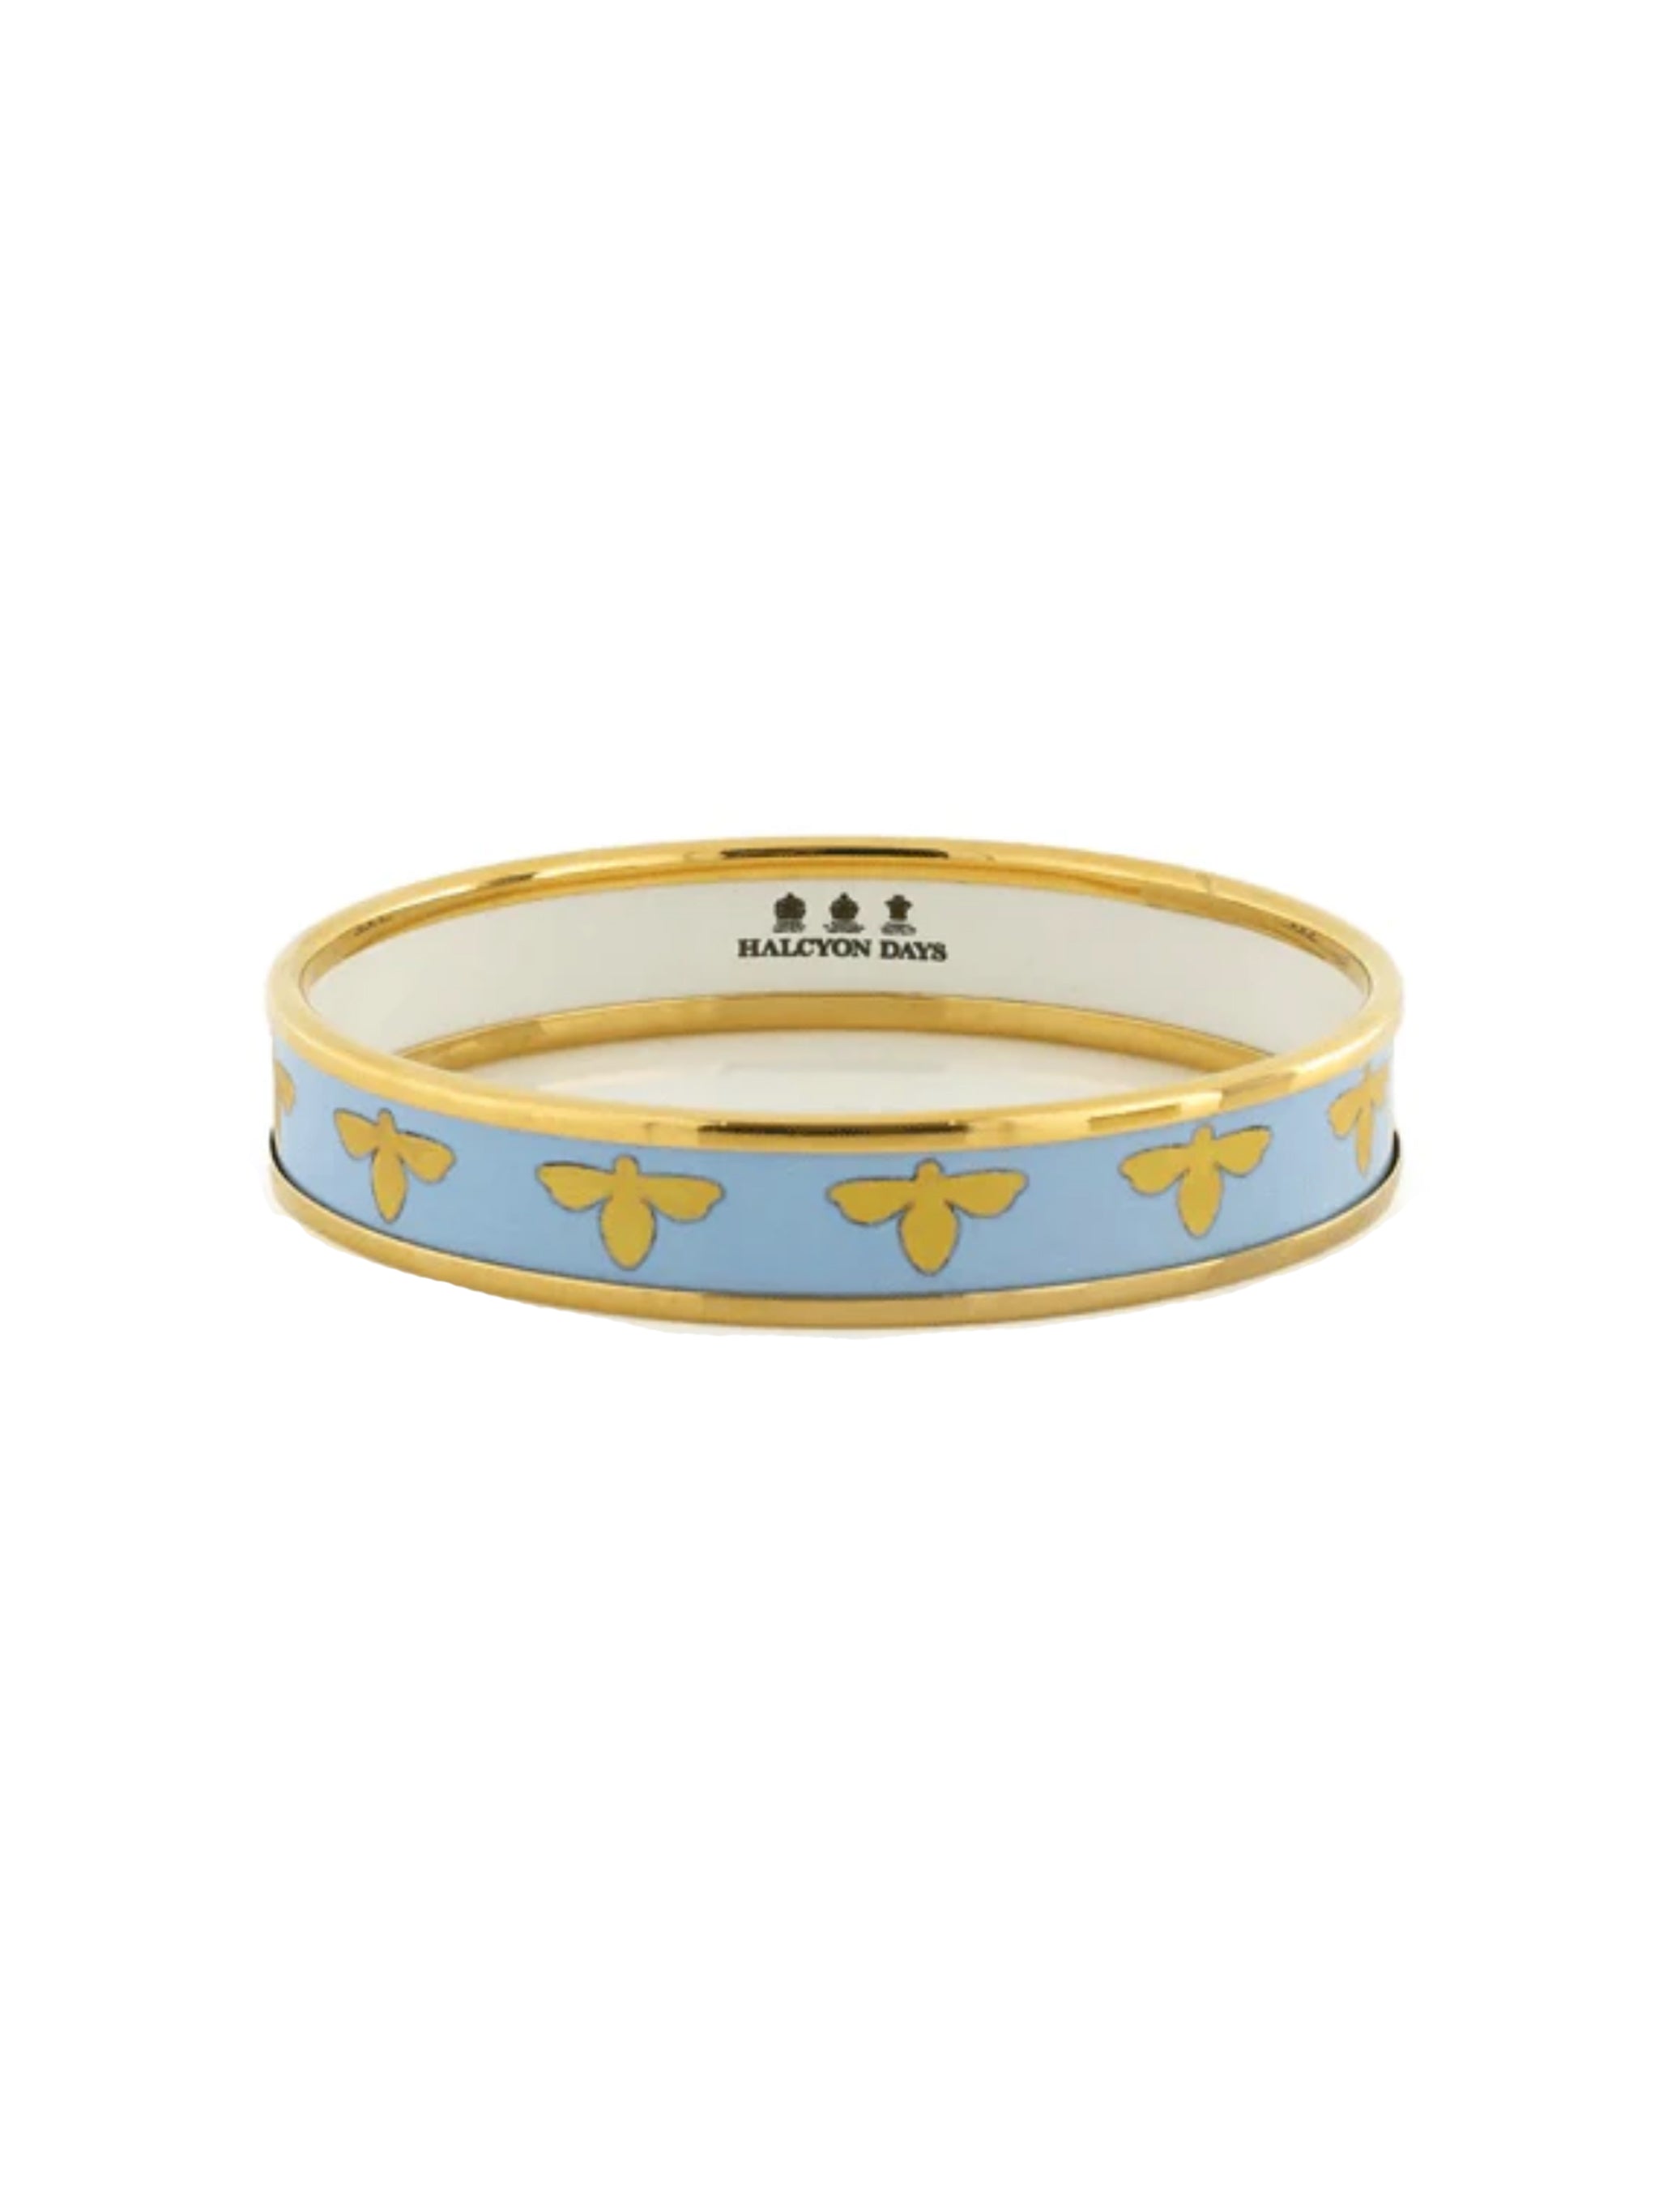 Shop the Halcyon Days Bee Forget-Me-Not Bangle at Weston Table